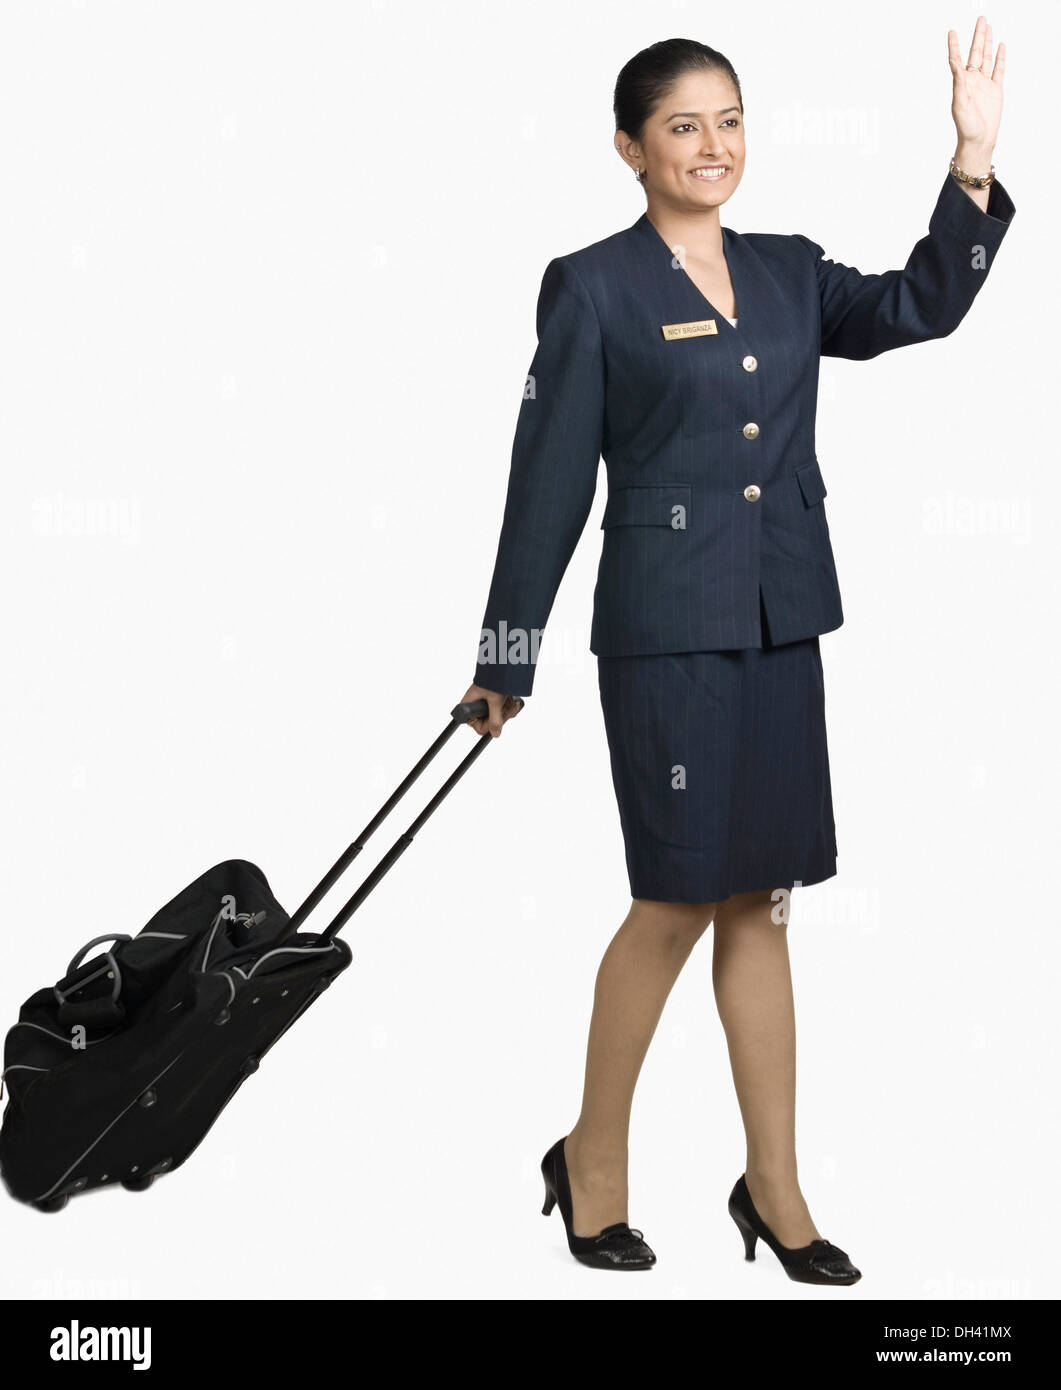 Air hostess carrying her luggage and smiling Stock Photo - Alamy